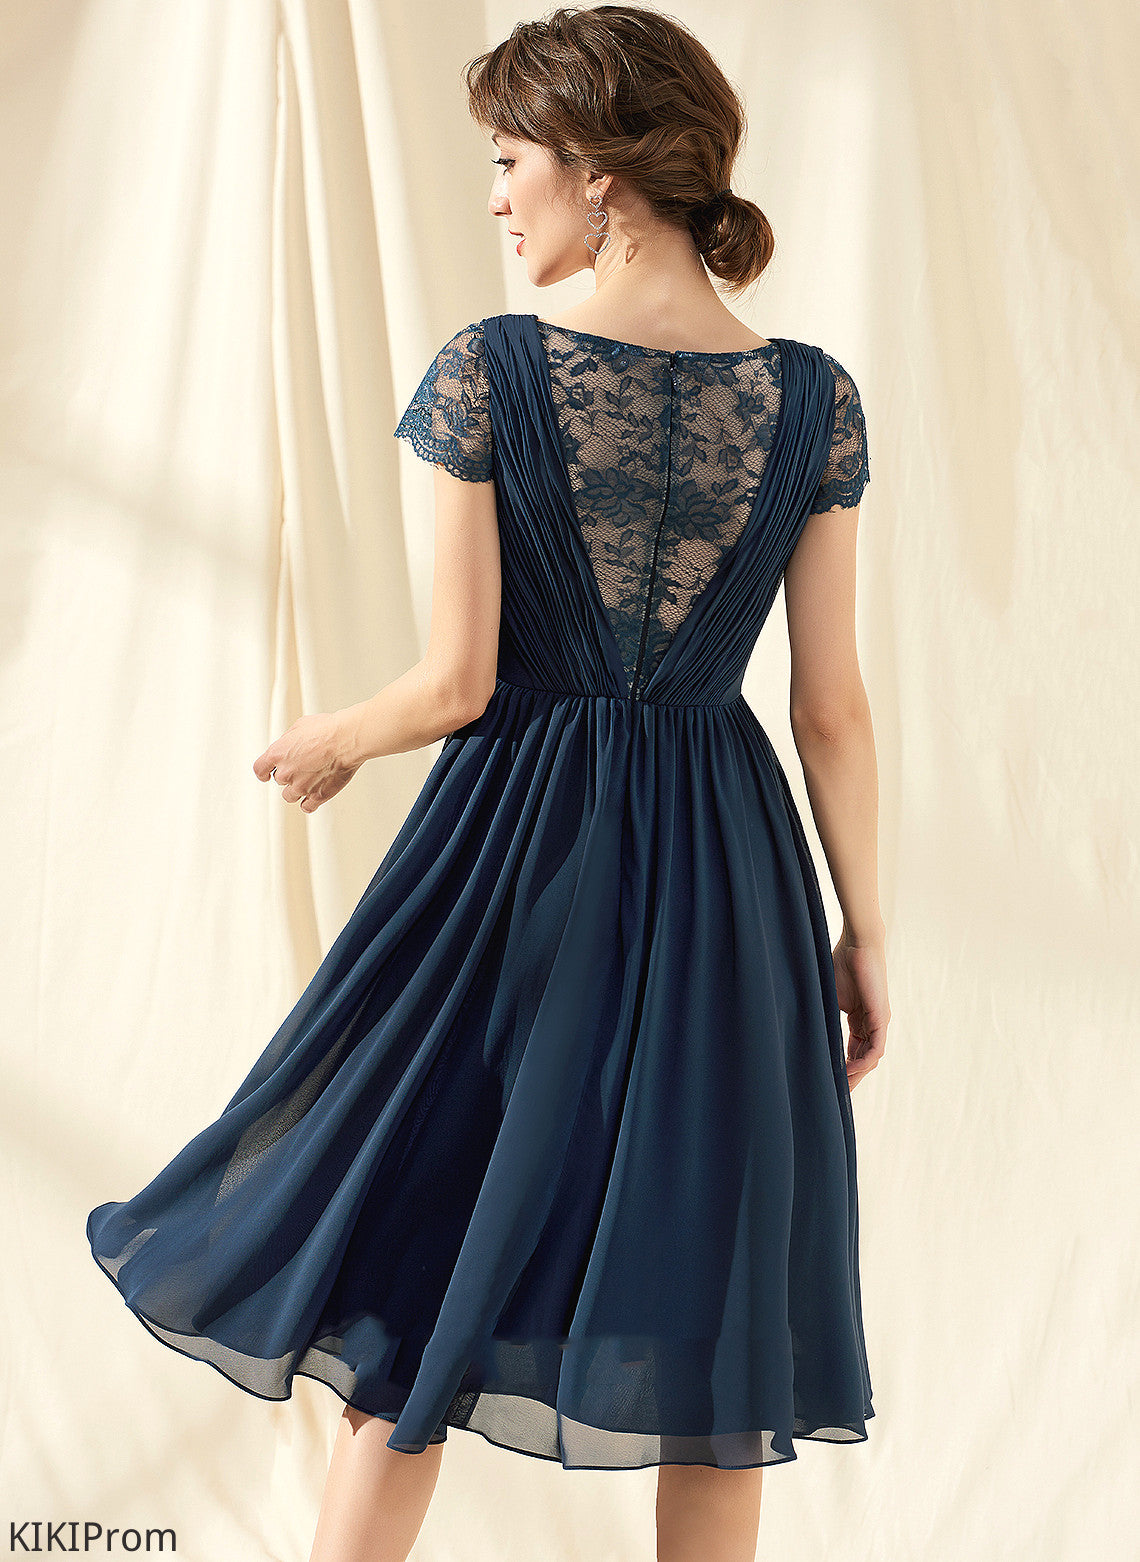 Dress With Knee-Length Homecoming A-Line Ruffle Chiffon Homecoming Dresses V-neck Baylee Lace